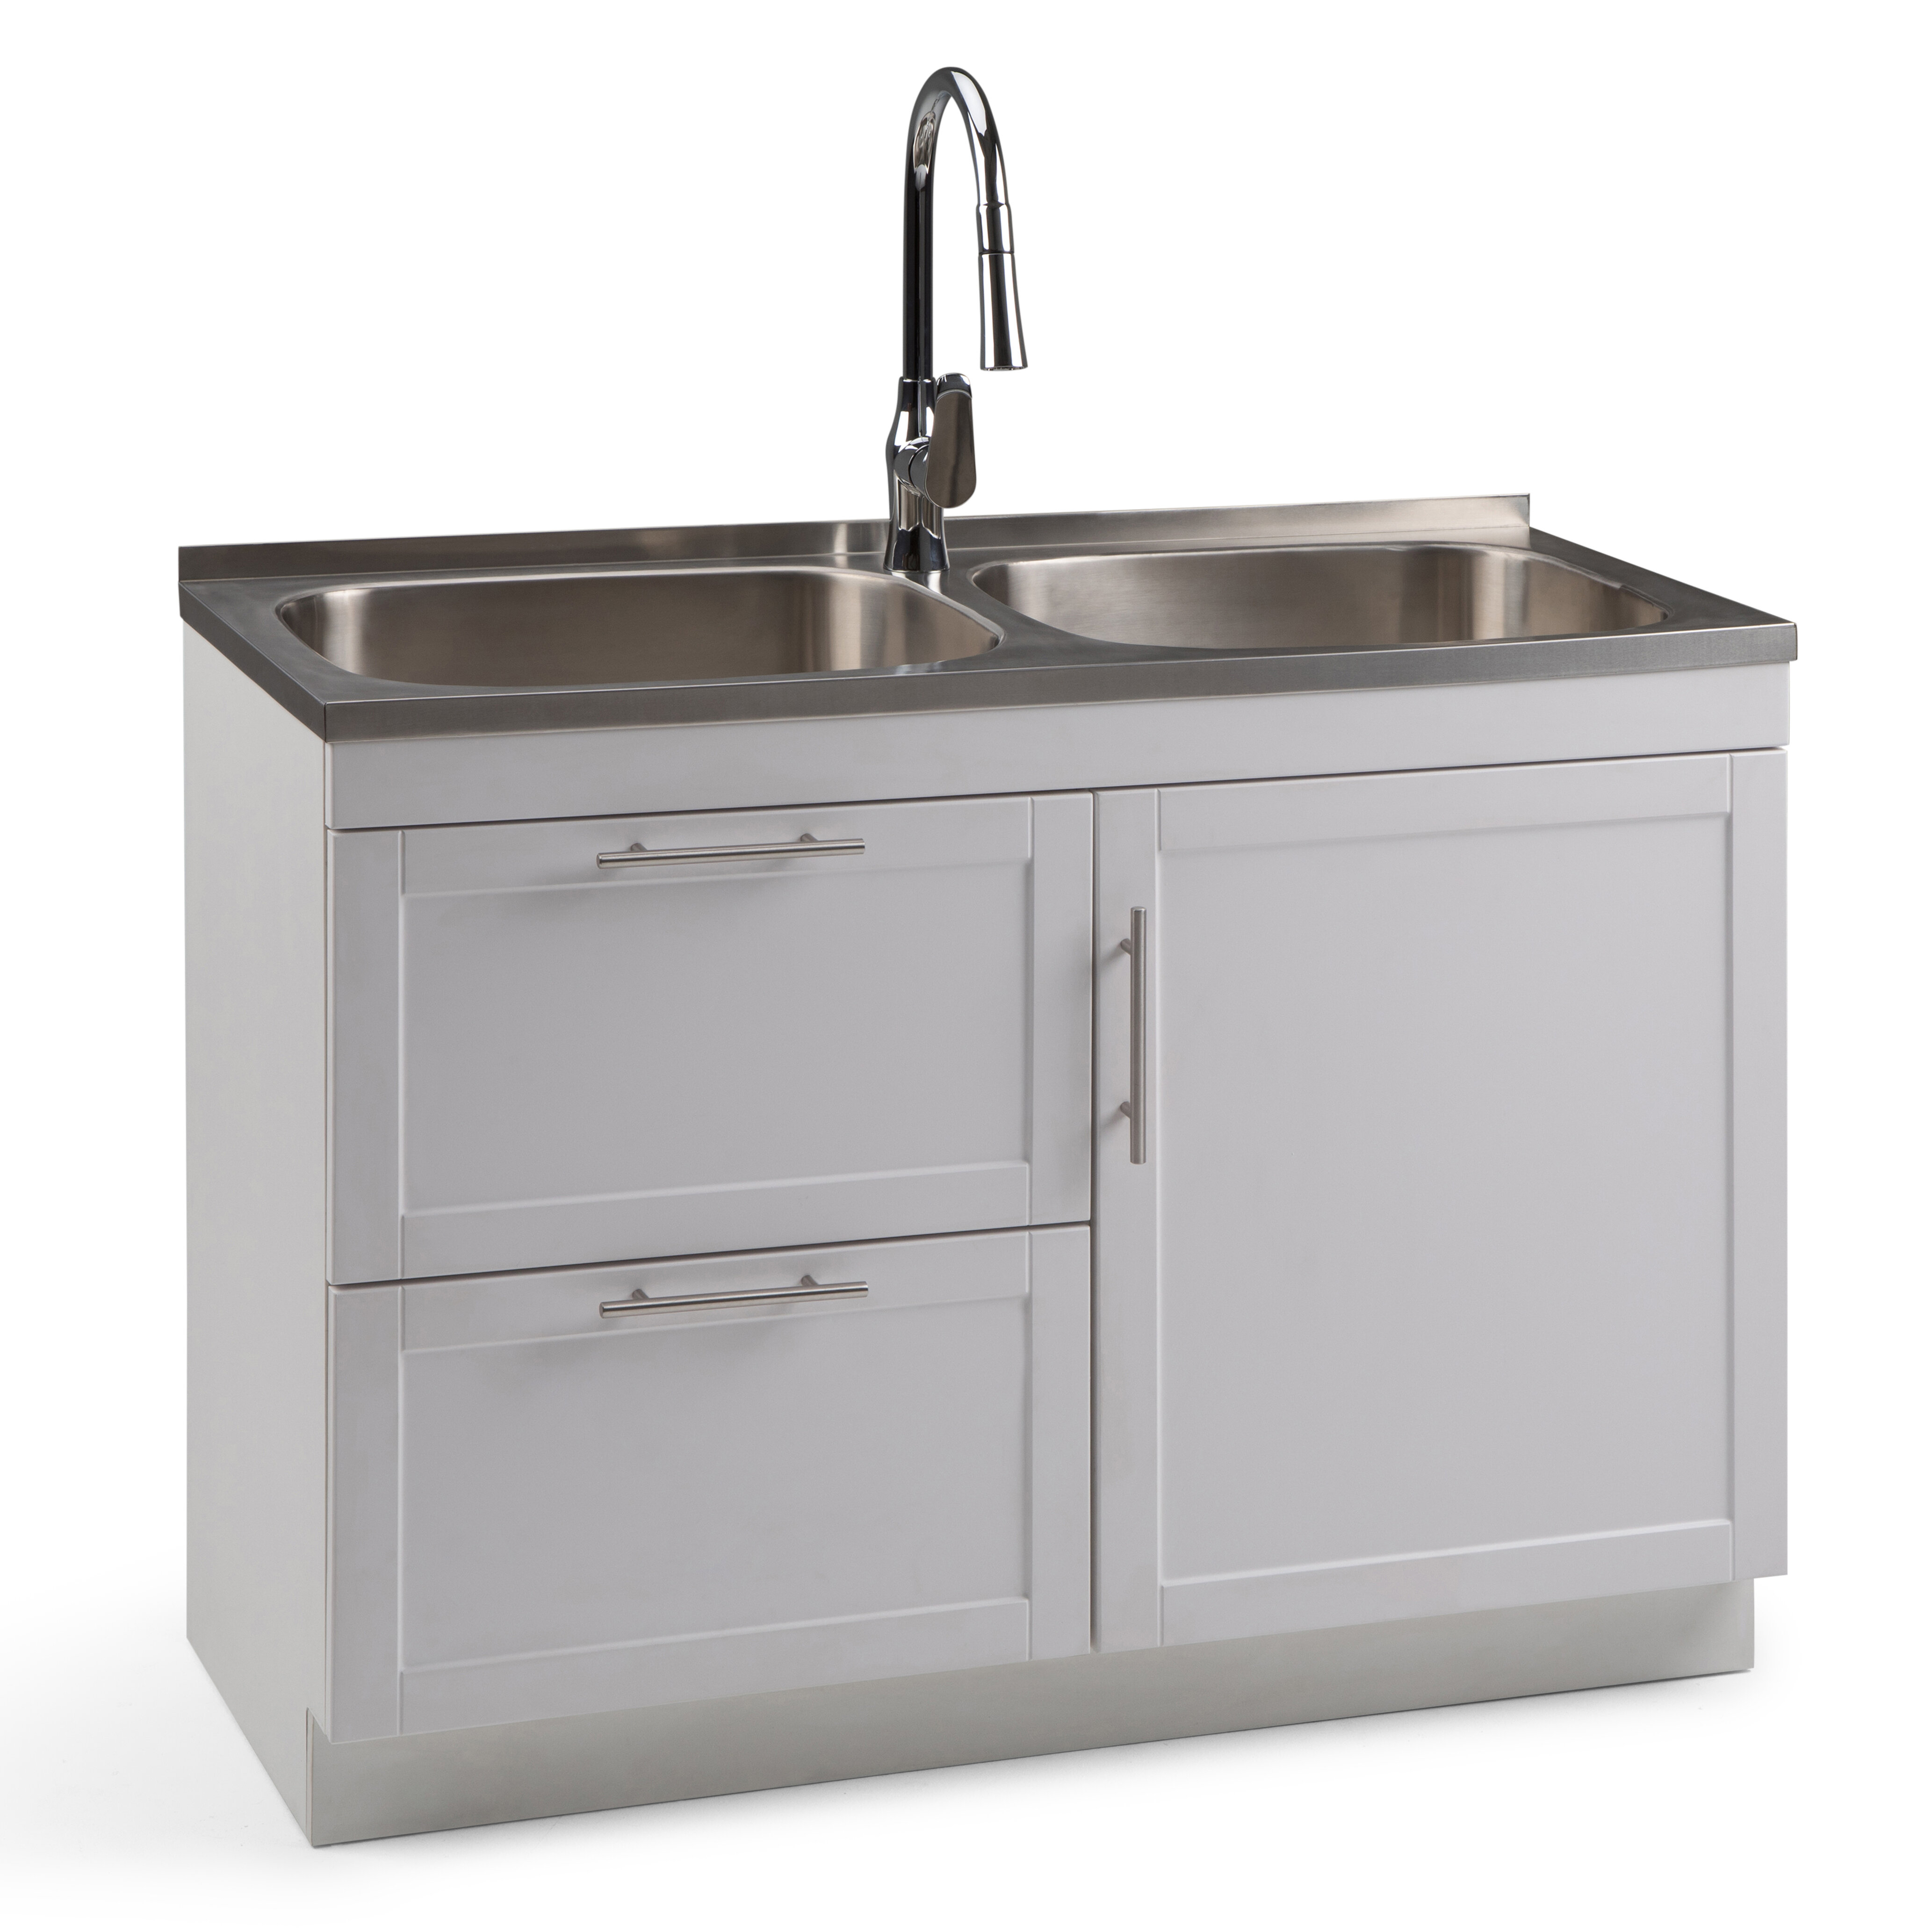 Darby Home Co Bothell 46 X 20 Freestanding Laundry Sink With